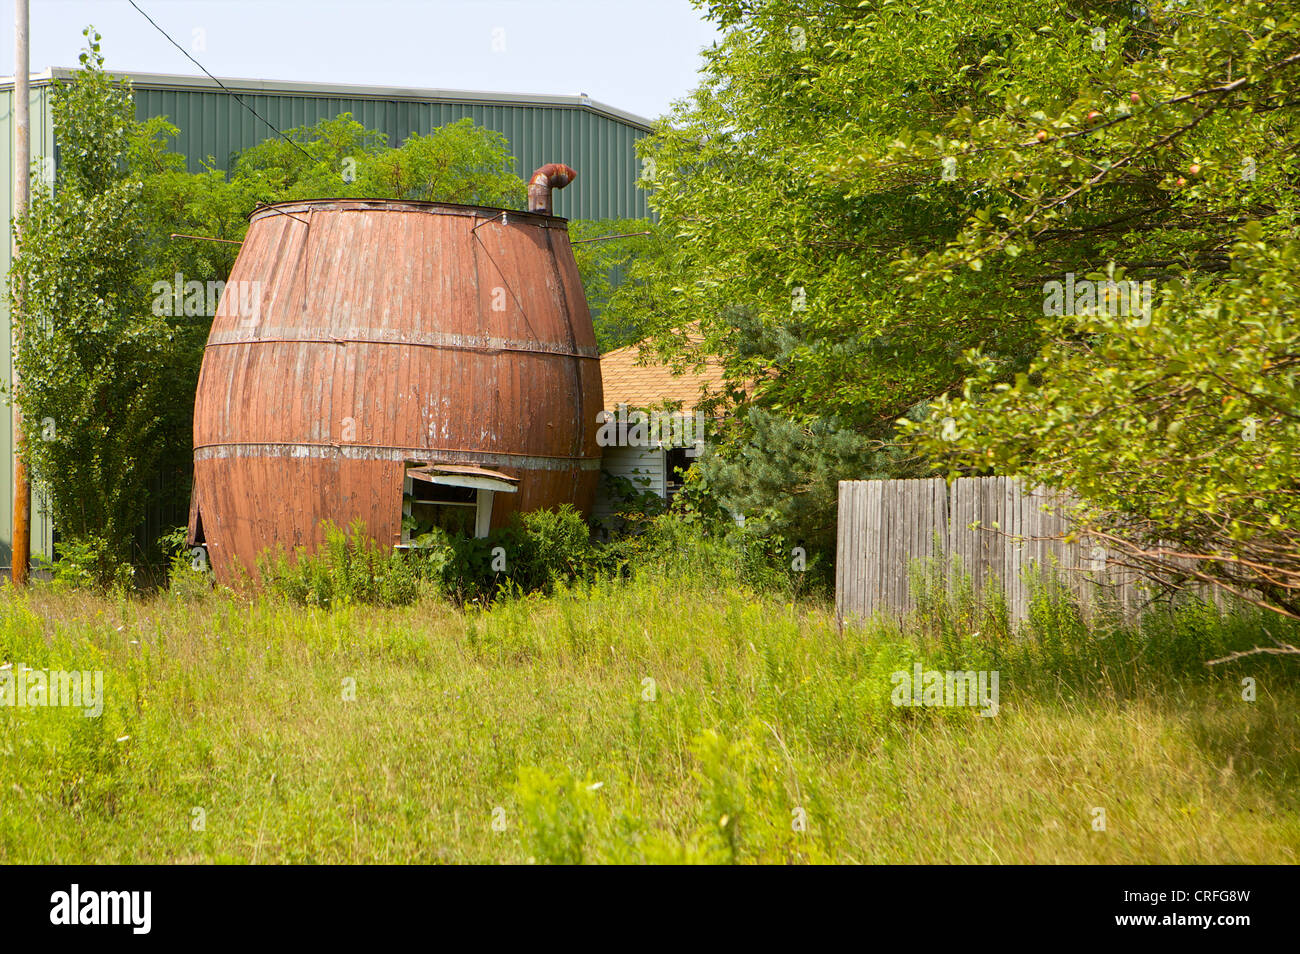 The Root Beer Barrel, a popular concession stand in the 1950's sits abandoned in an overgrown lot. Stock Photo